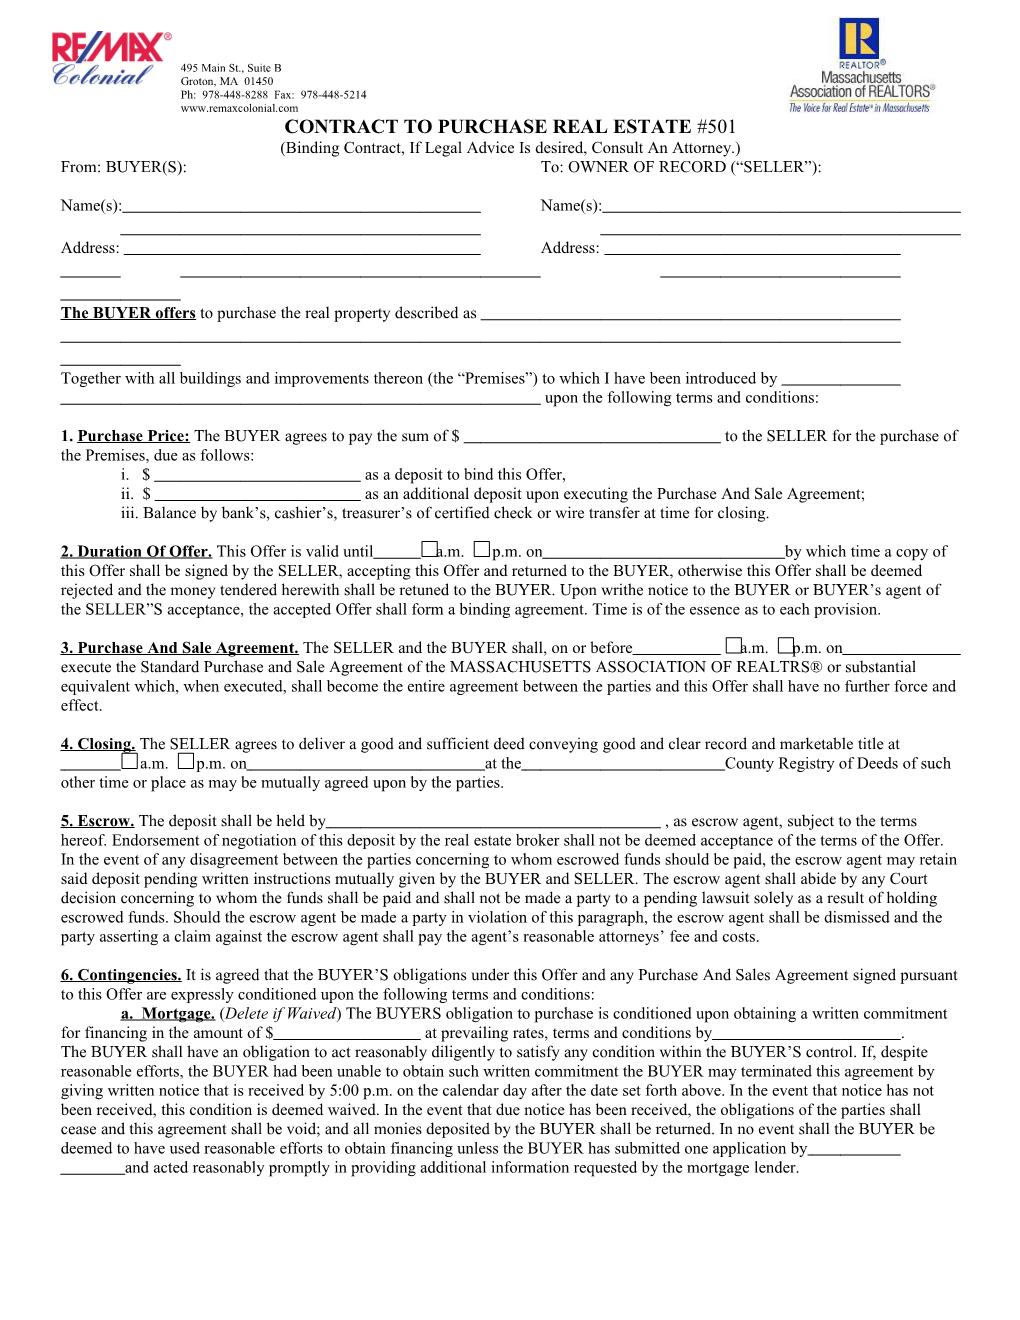 Contract to Purchase Real Estate #501